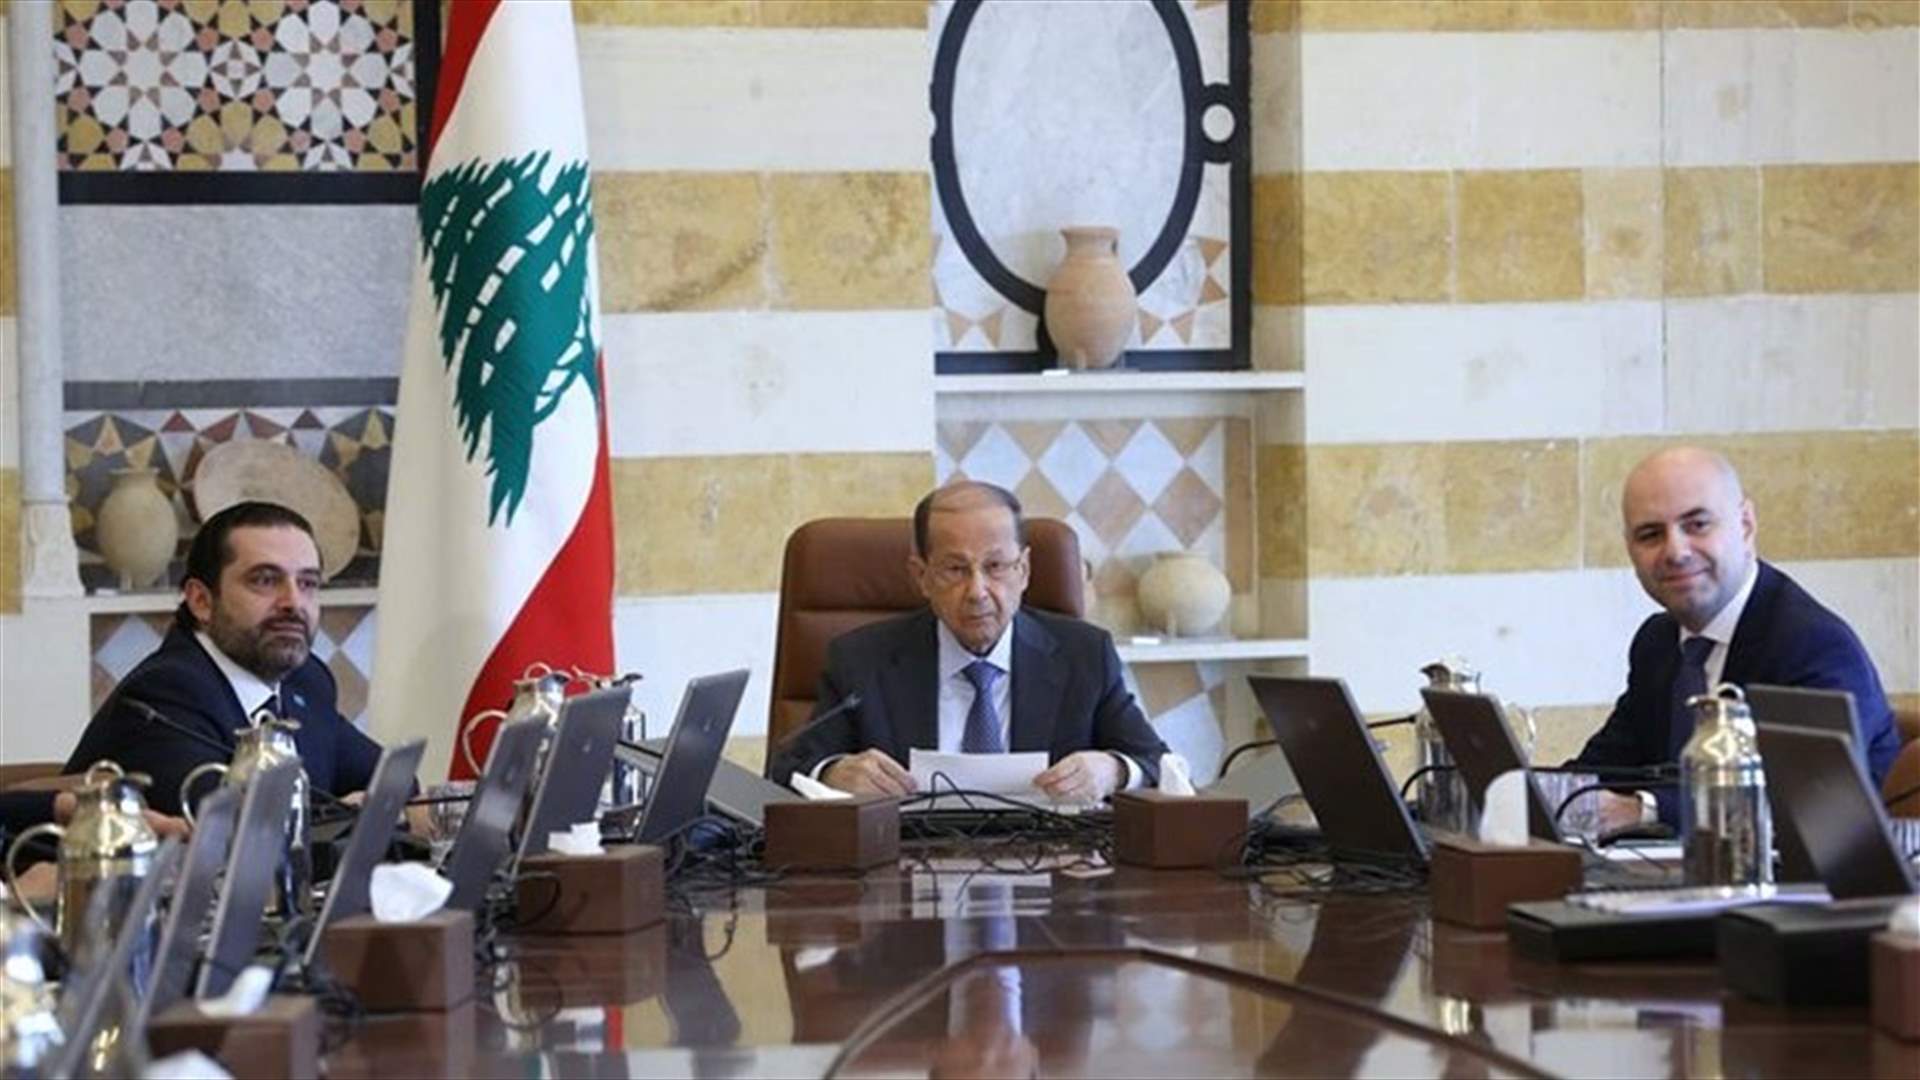 Cabinet session held in Baabda: Commitment to completing budget discussions